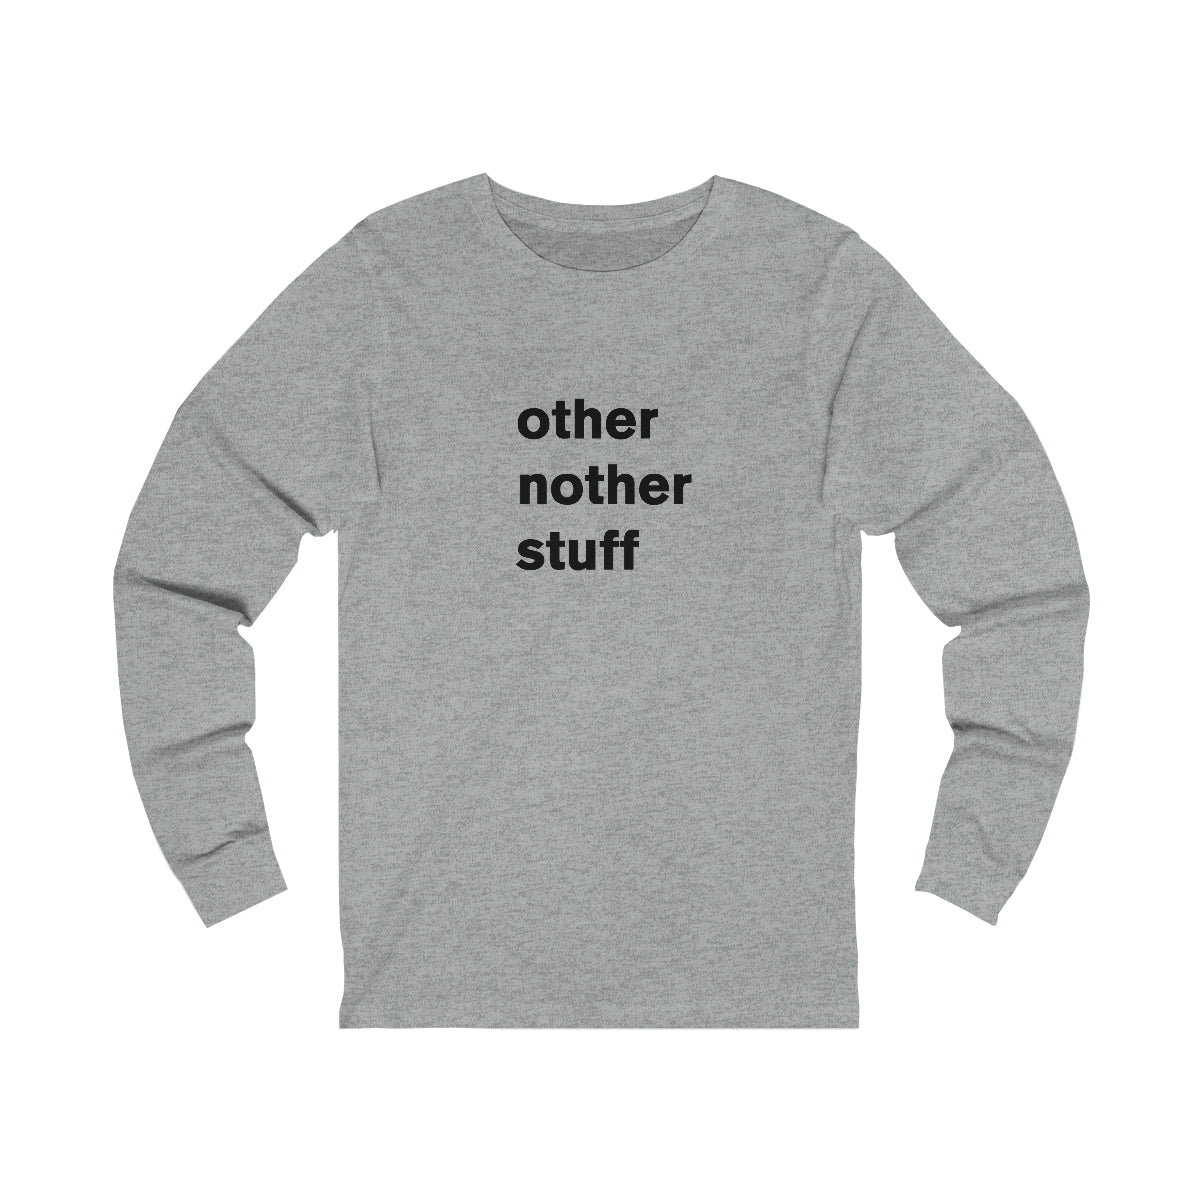 other nother stuff - long sleeve